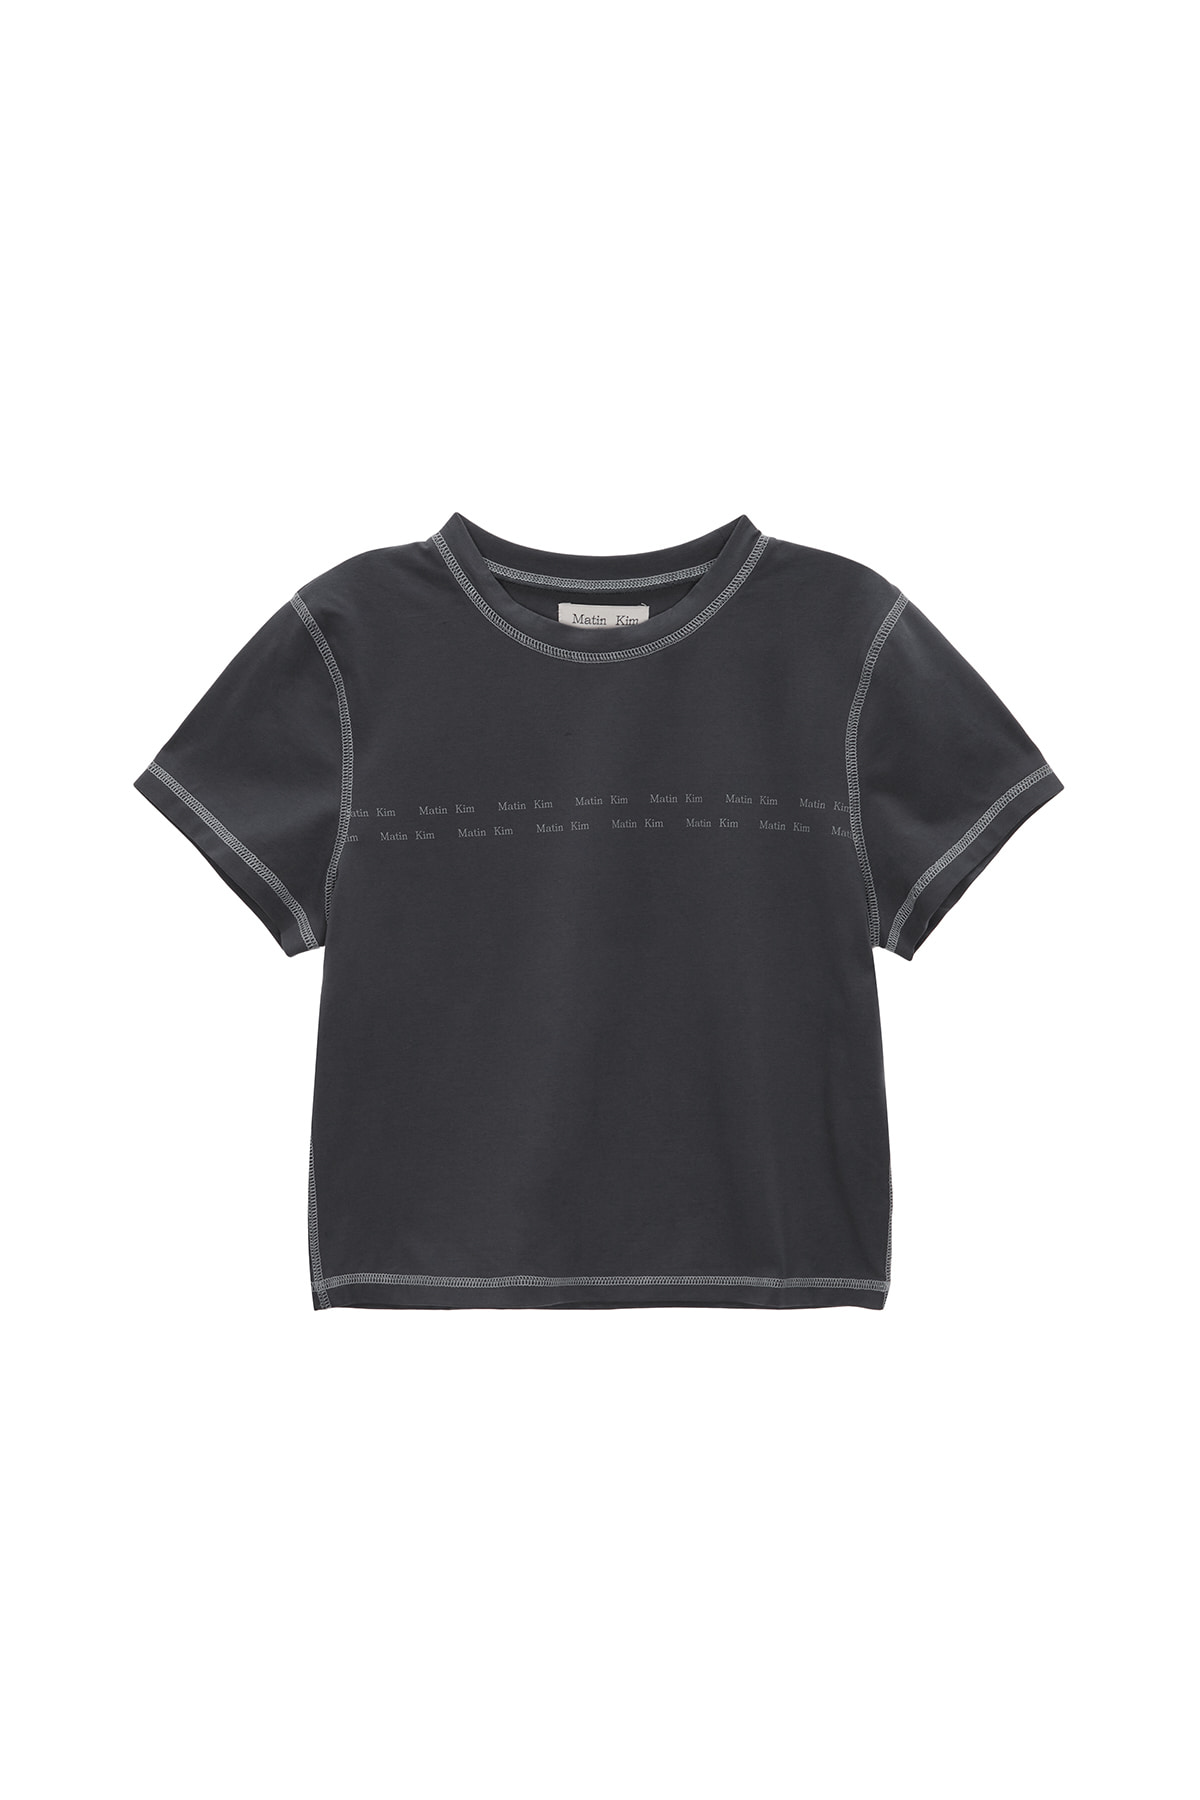 DOUBLE LINE LOGO STITCH CROP TOP IN CHARCOAL